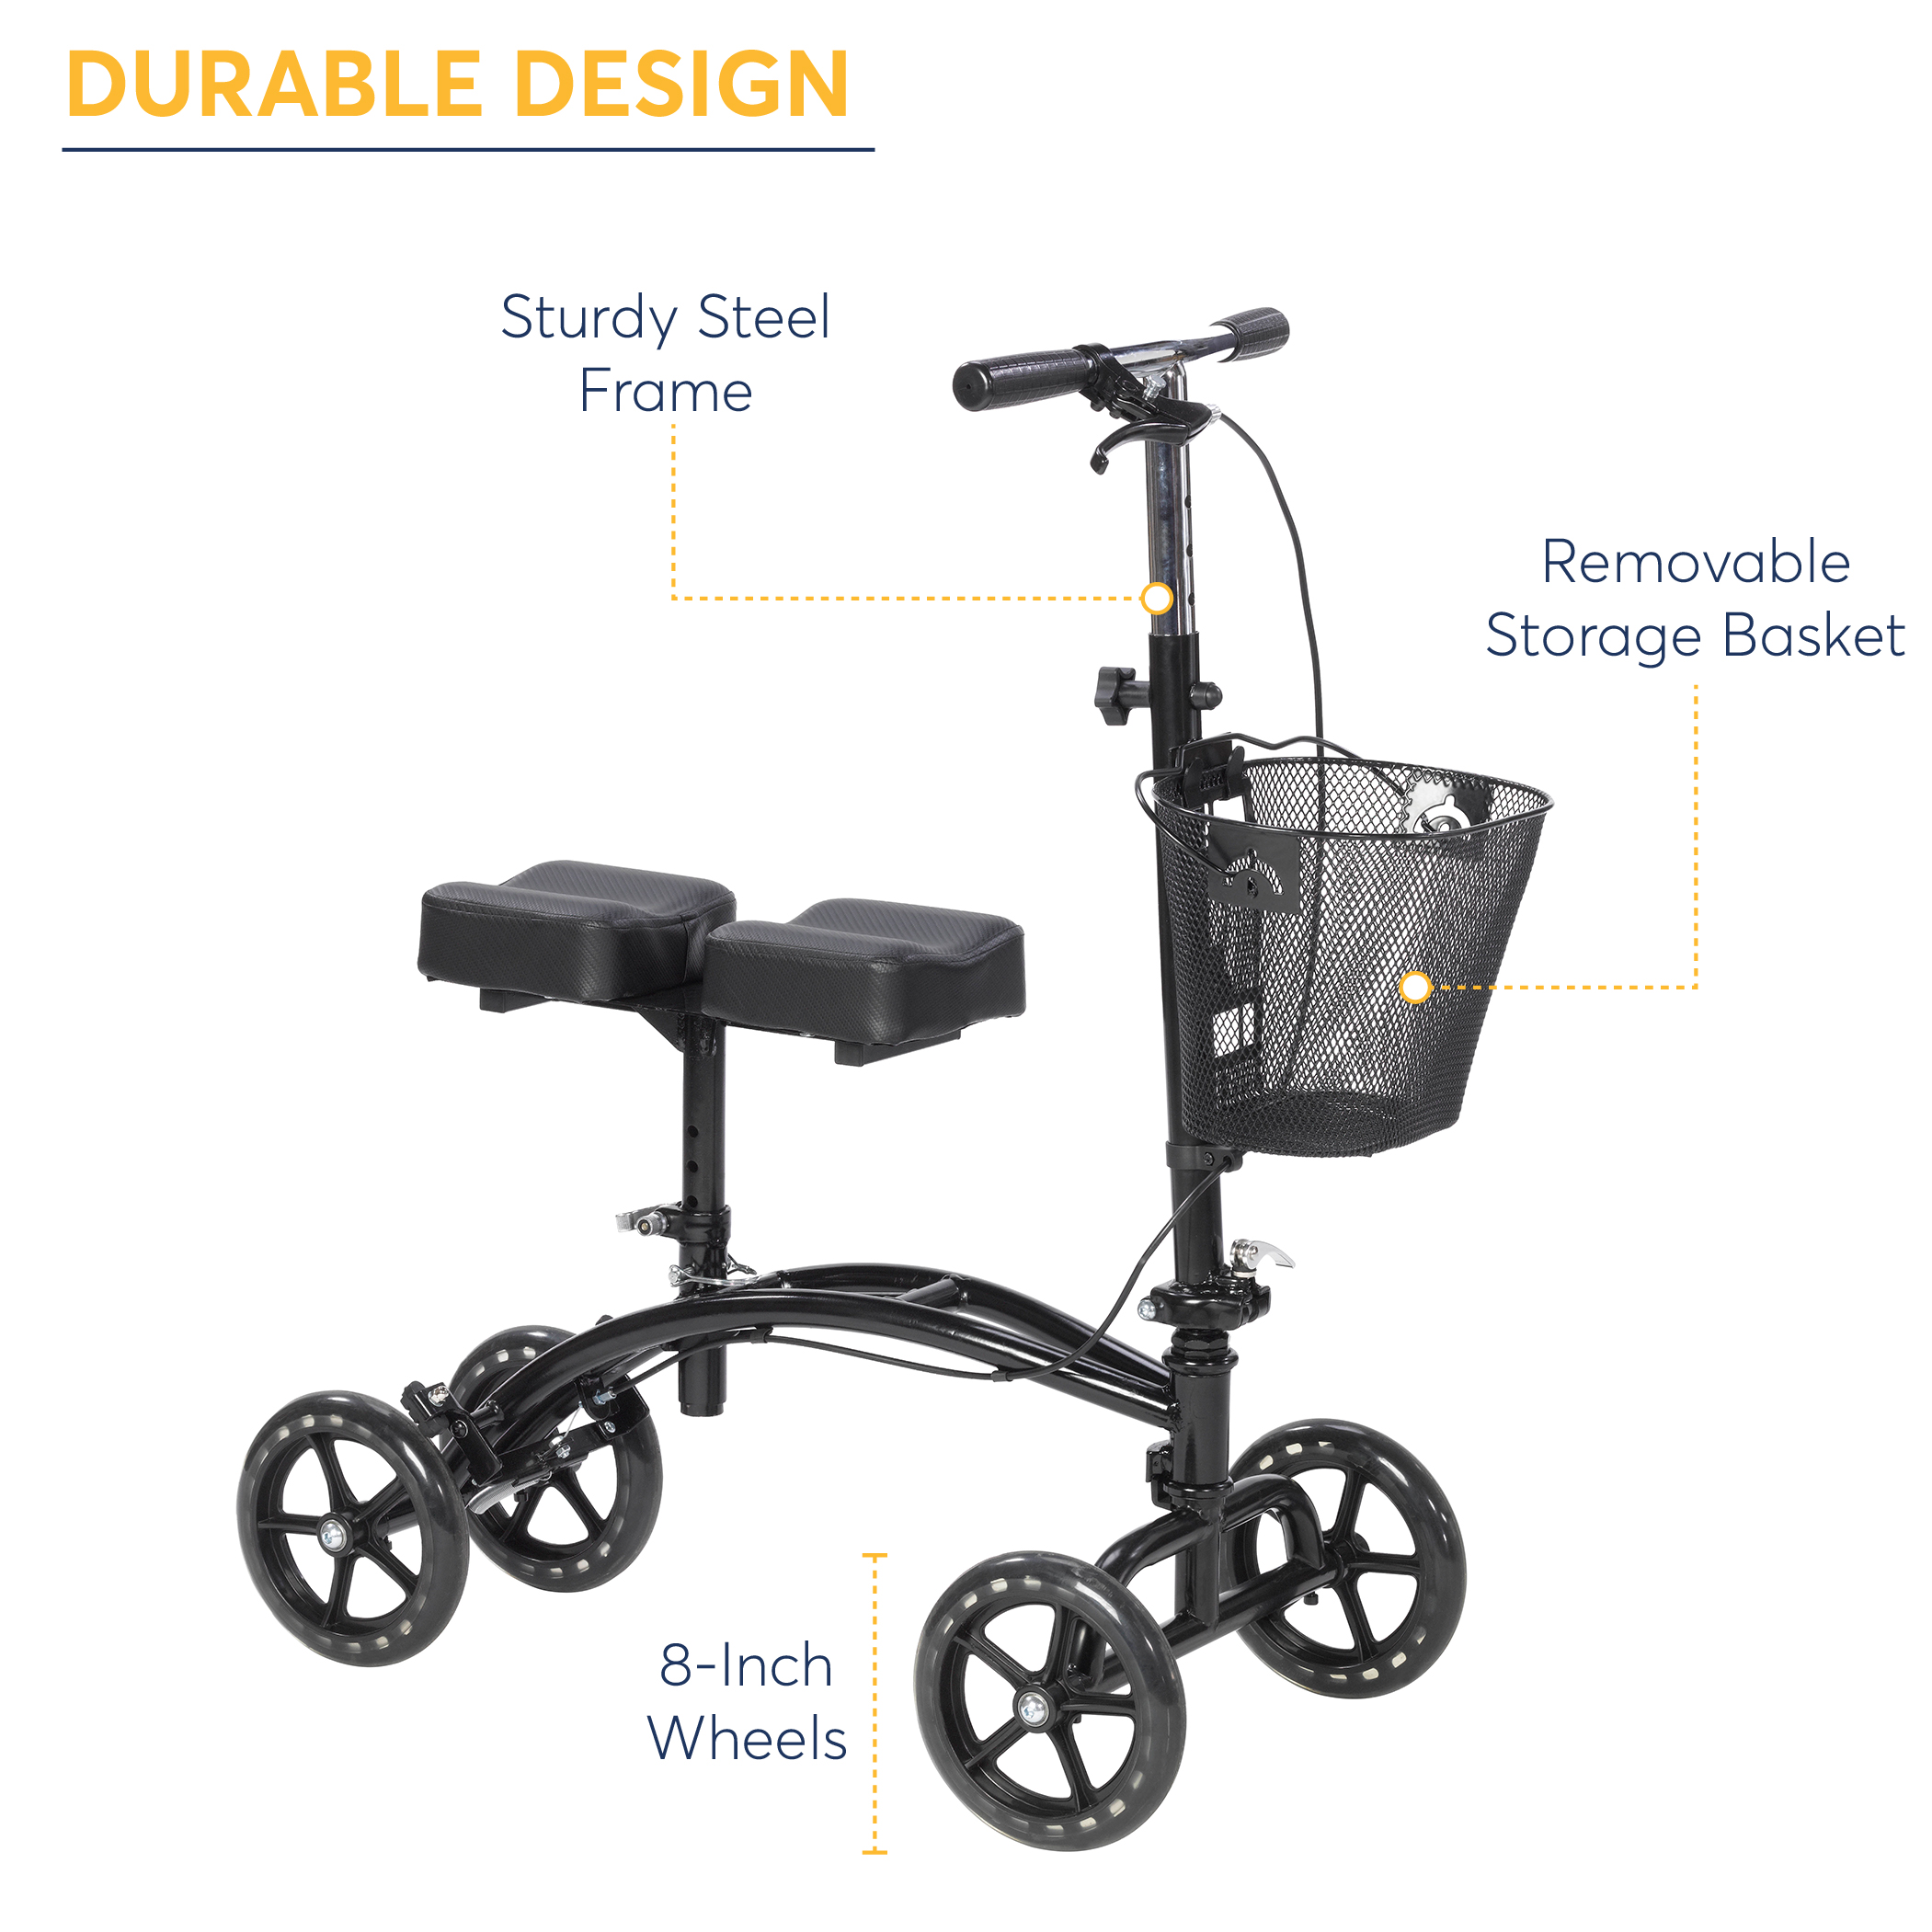 Drive Medical Dual Pad Steerable Knee Walker Knee Scooter with Basket, Alternative to Crutches - image 3 of 6